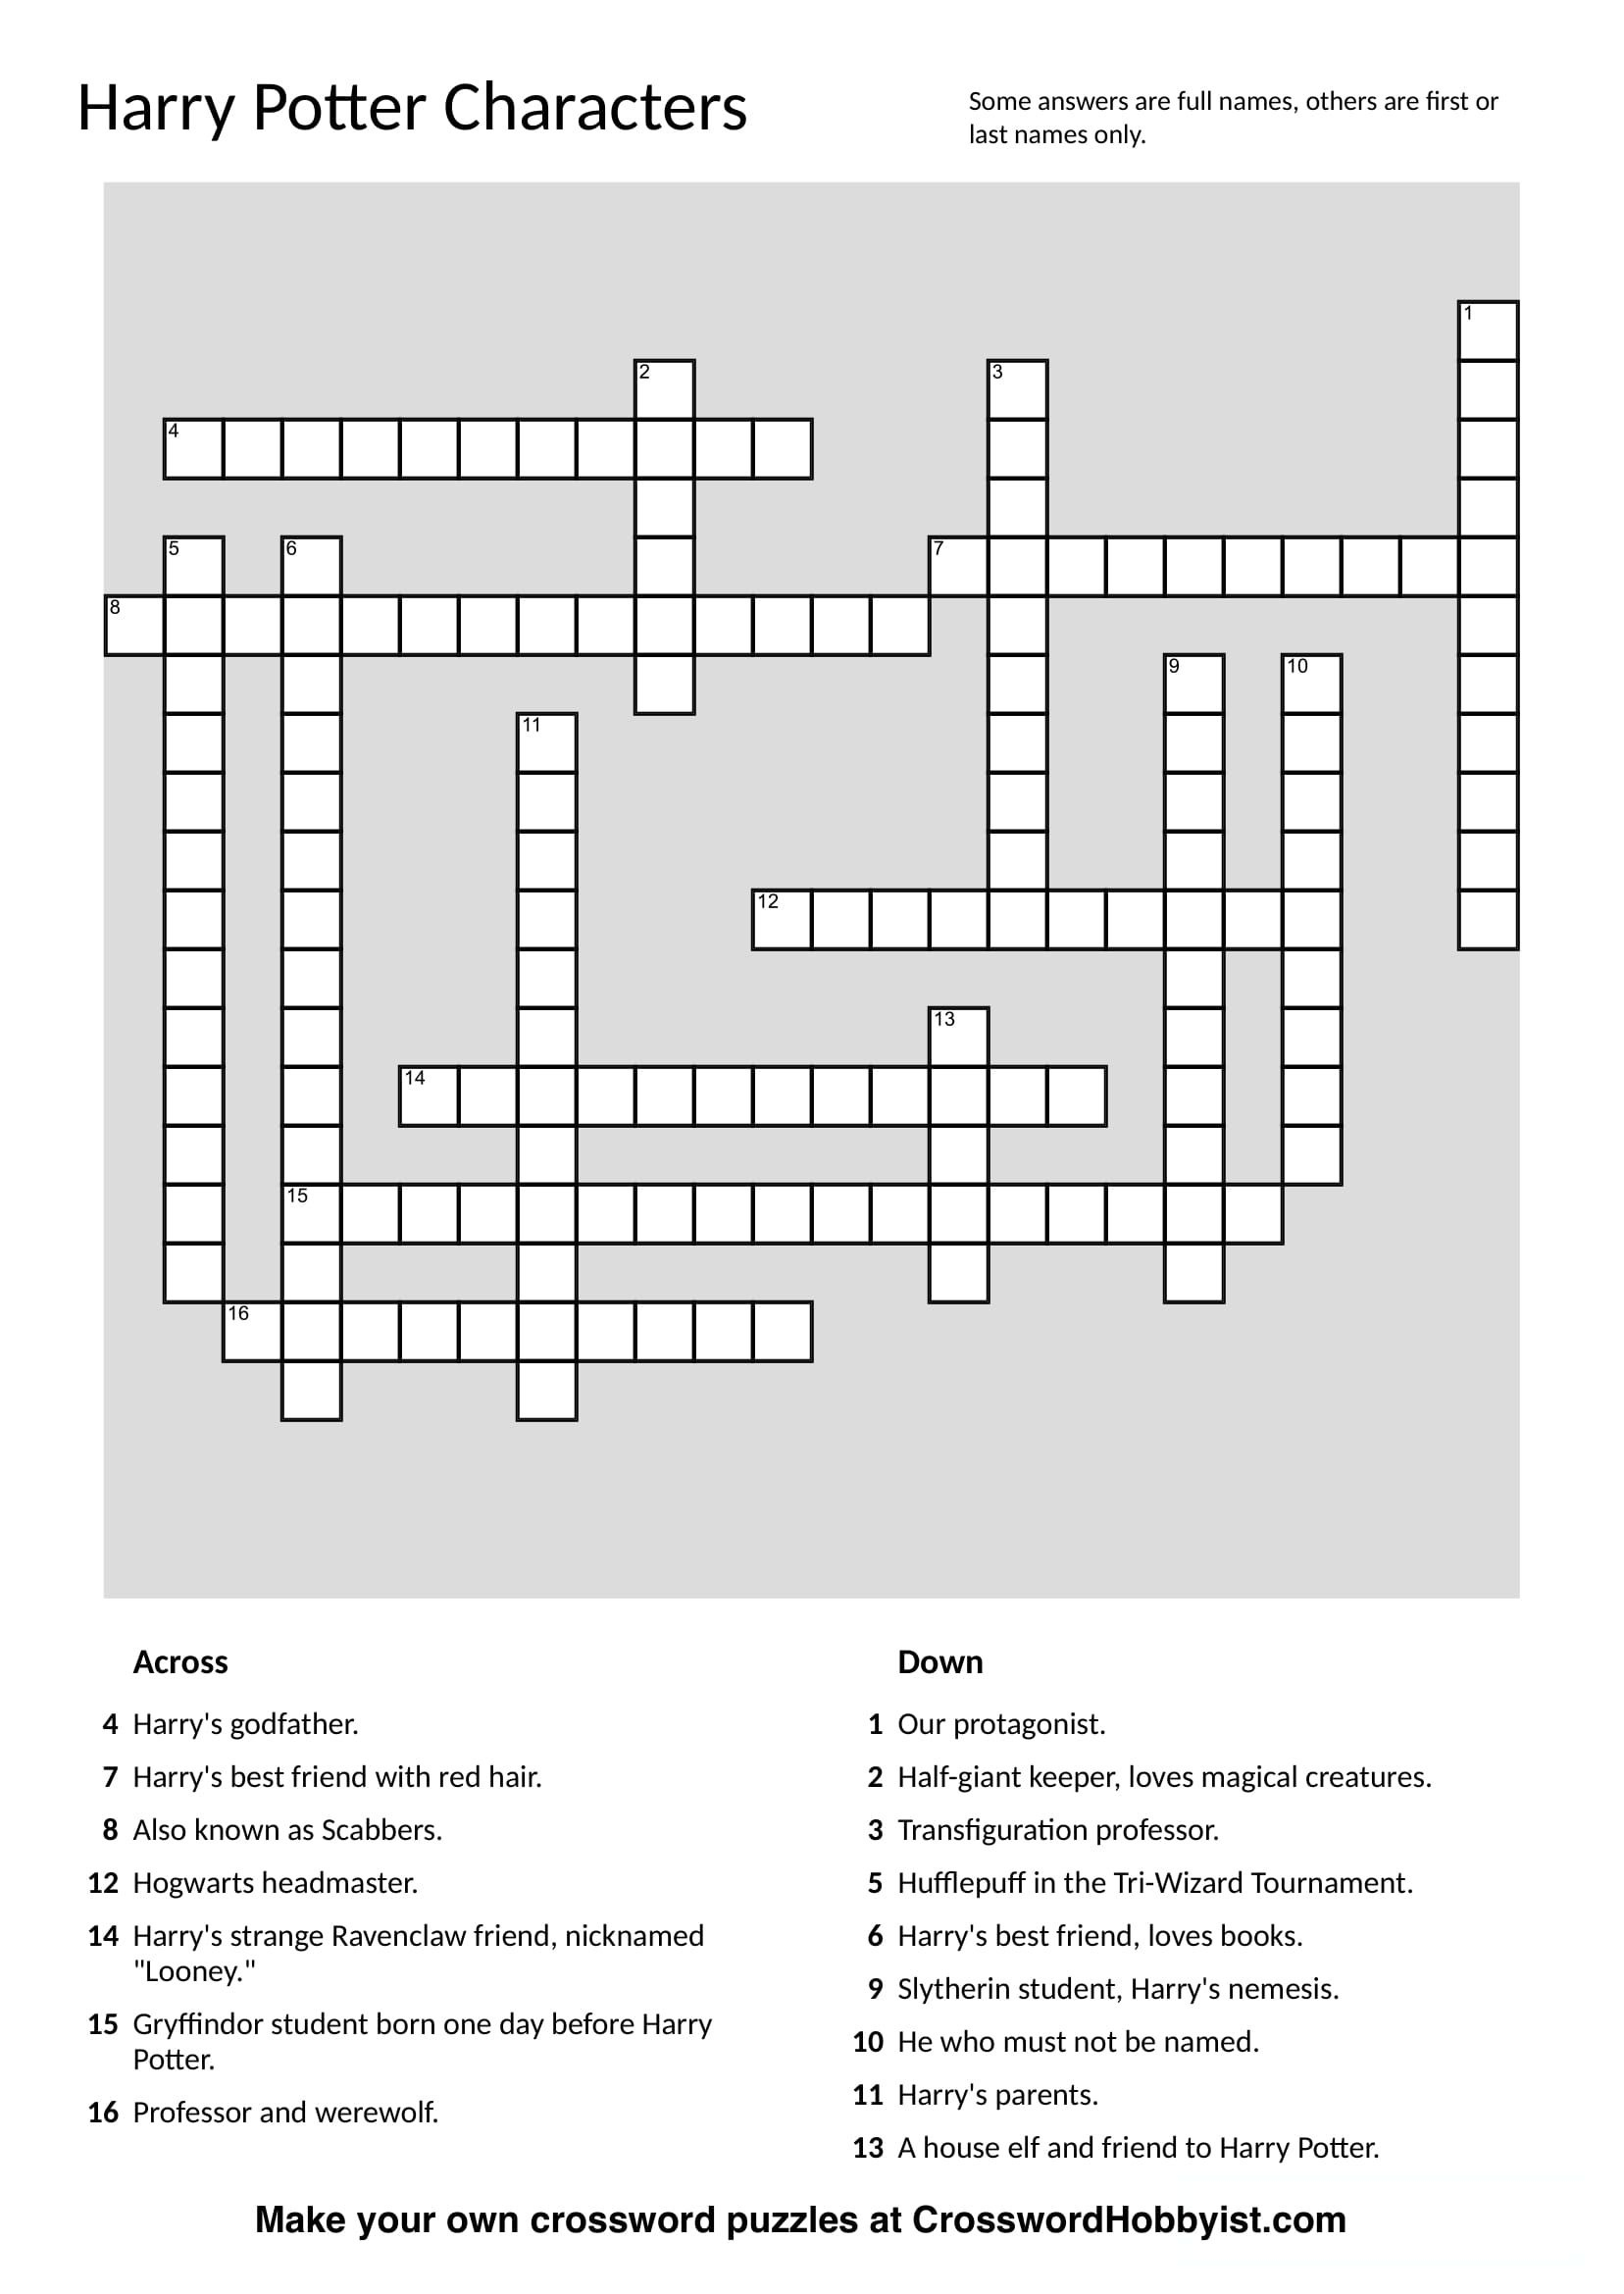 How To Make Your Own Crossword Puzzle For Free And Printable